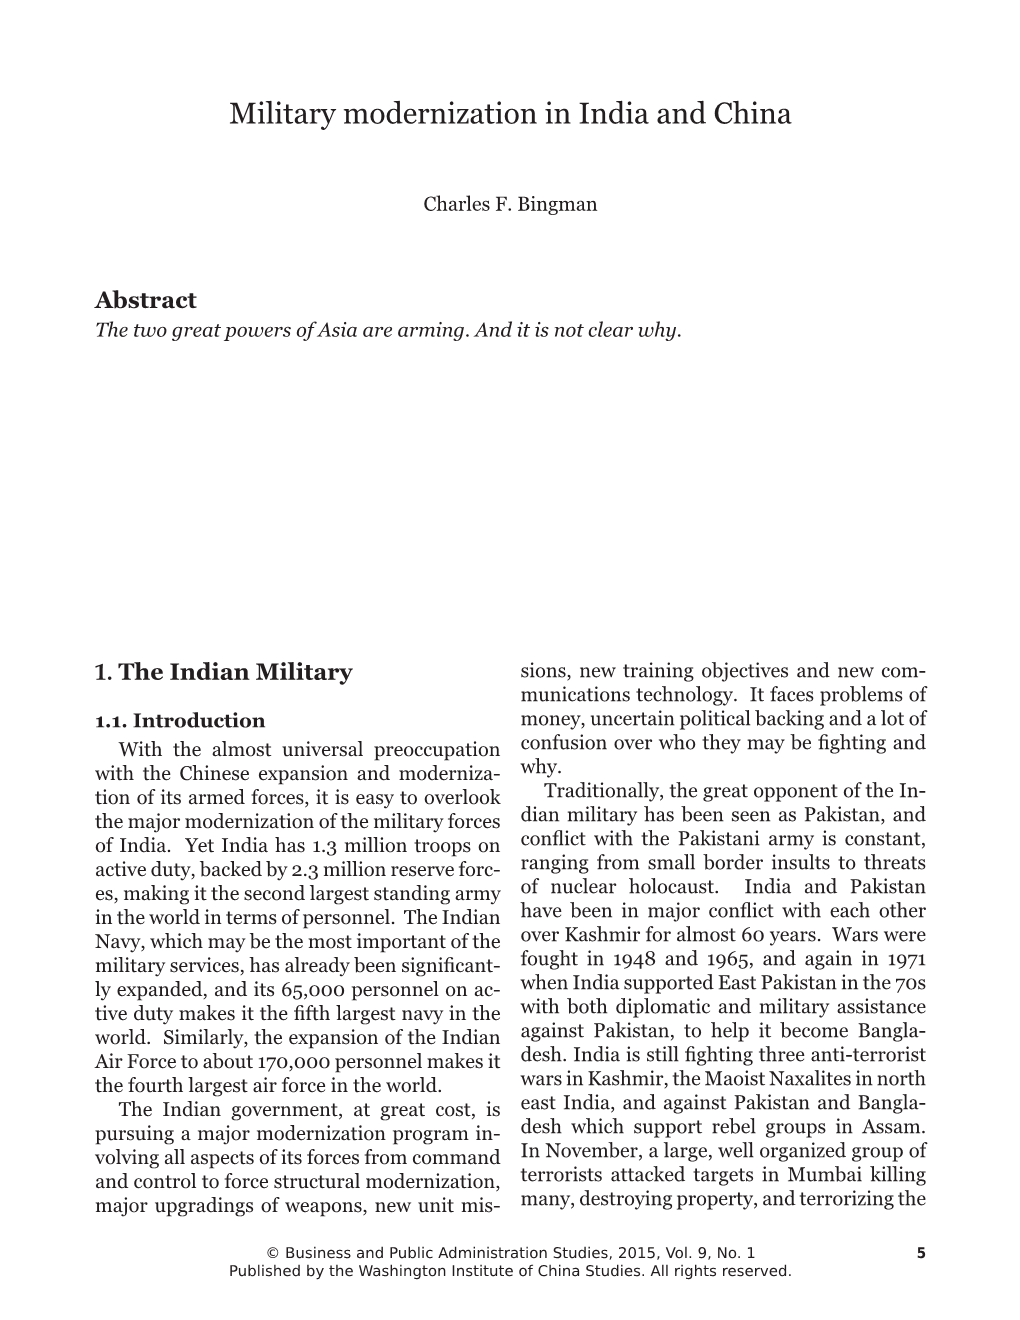 Military Modernization in India and China